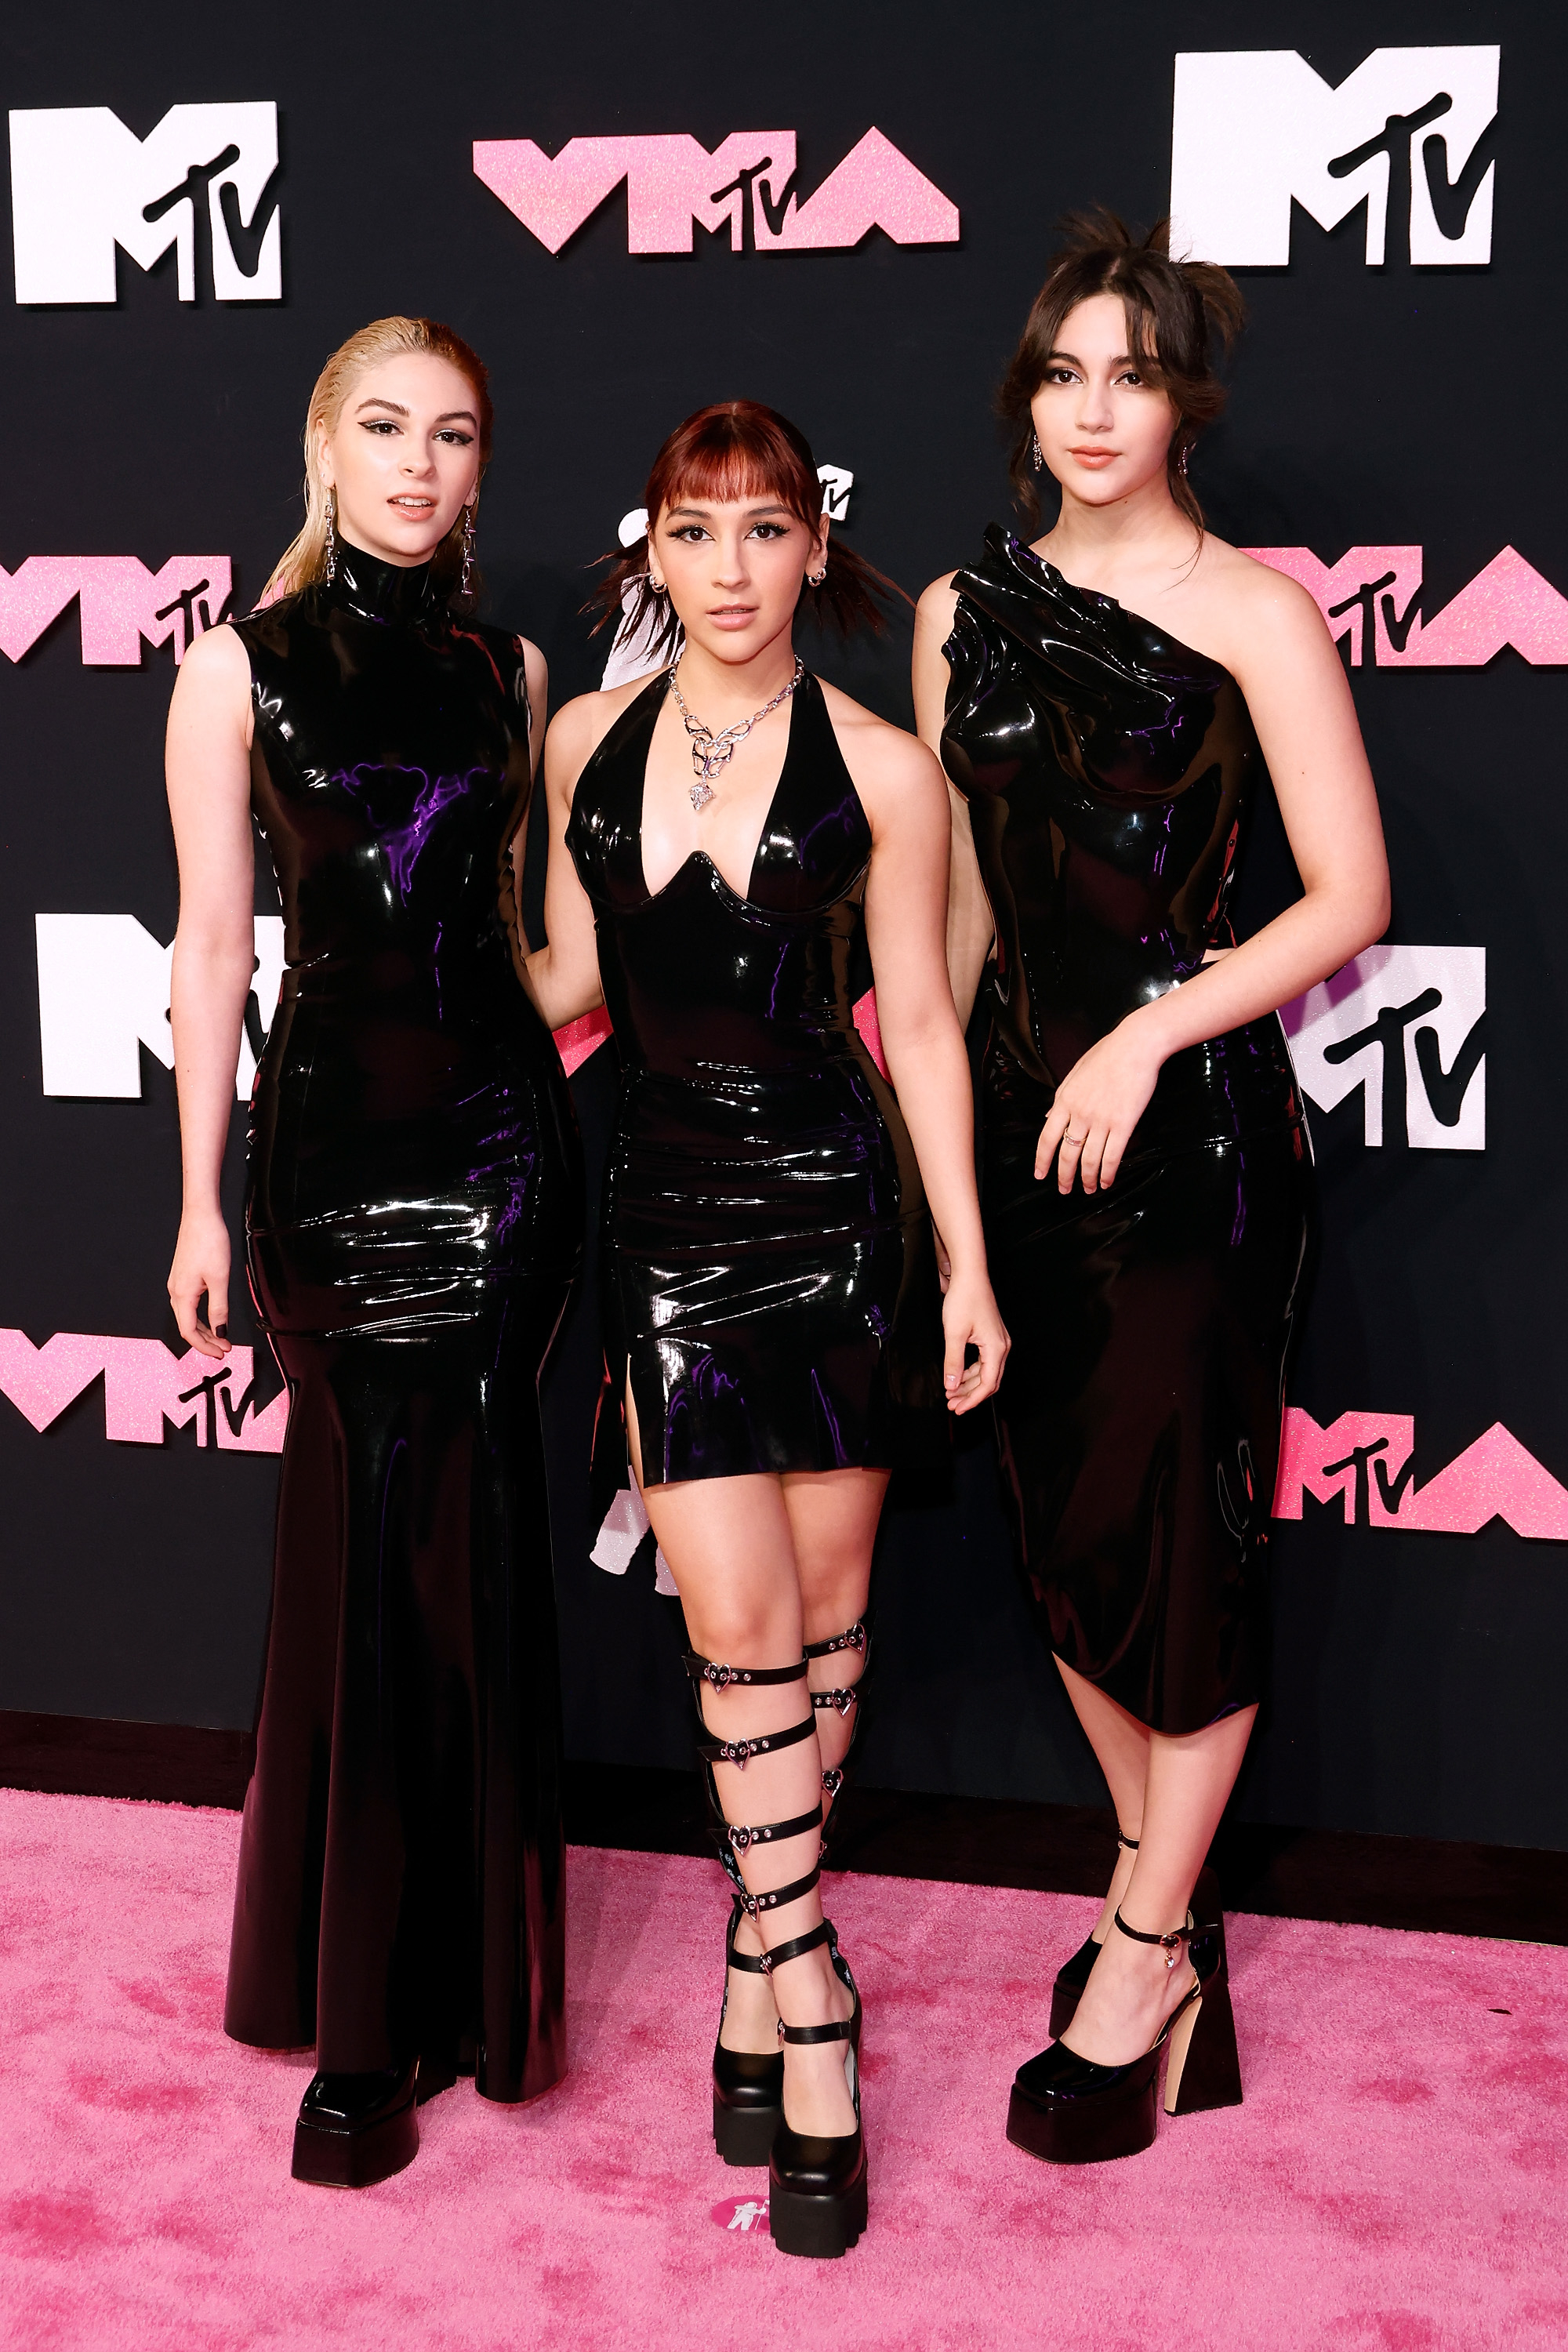 the three in different length dresses that are all tight patent leather